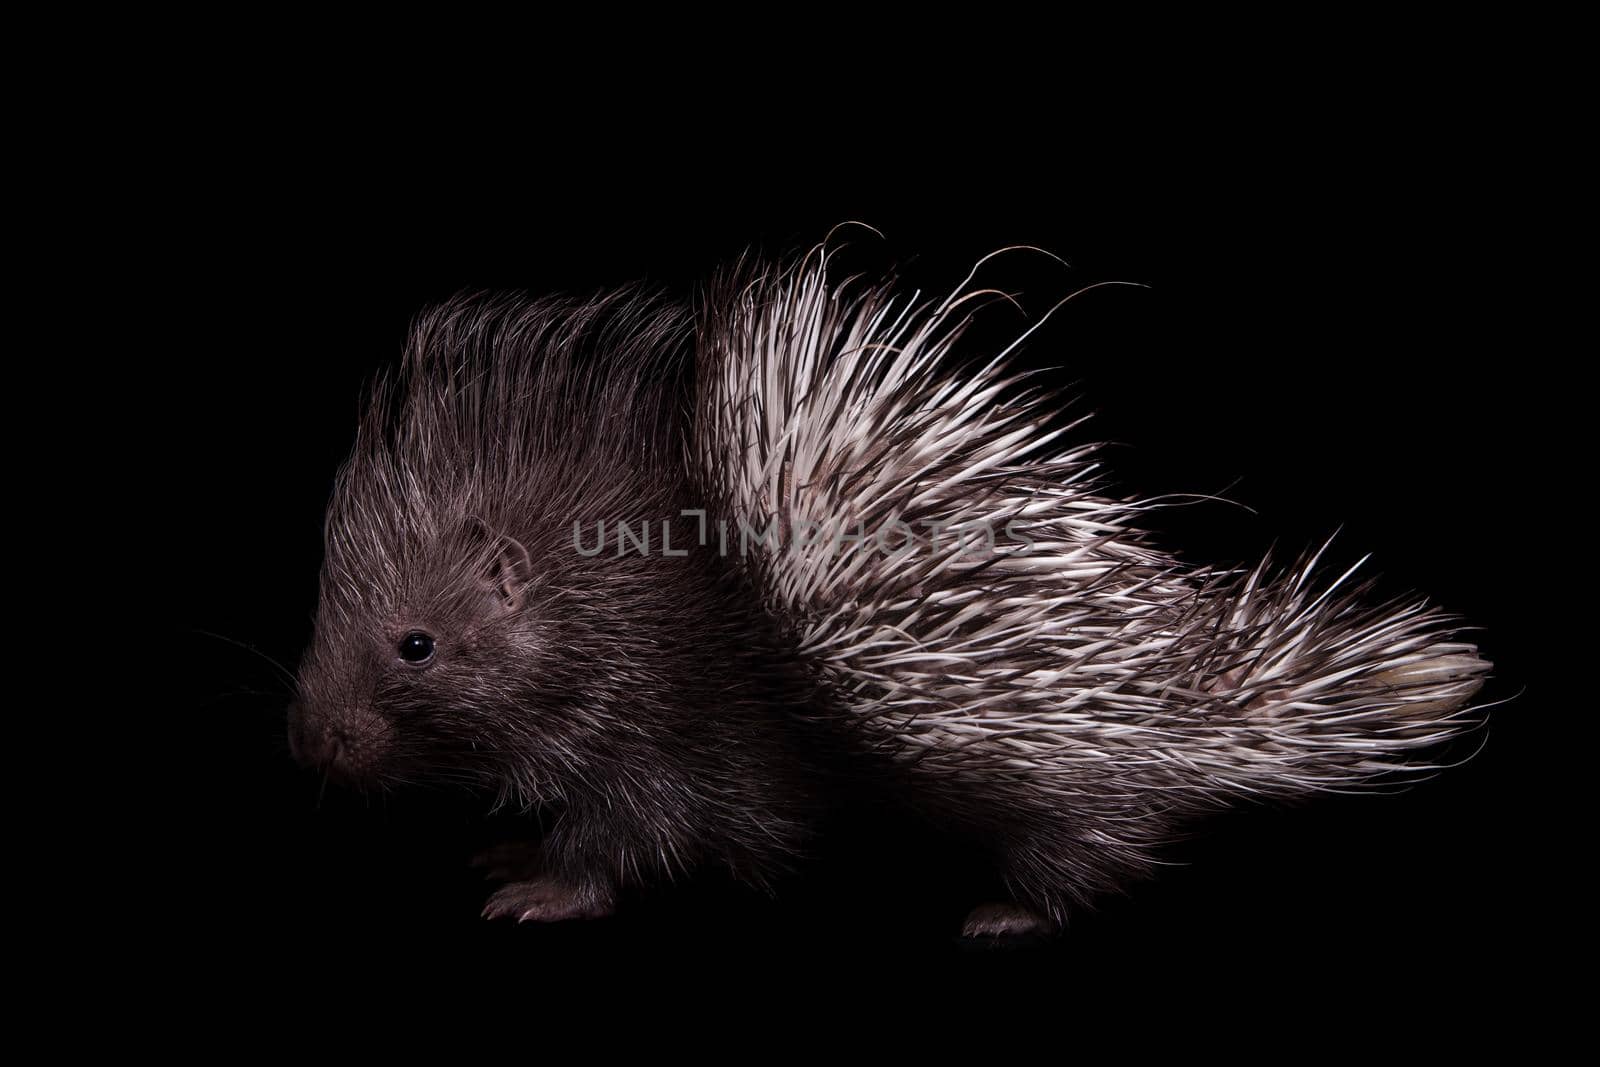 Indian crested Porcupine baby on black backgrond by RosaJay